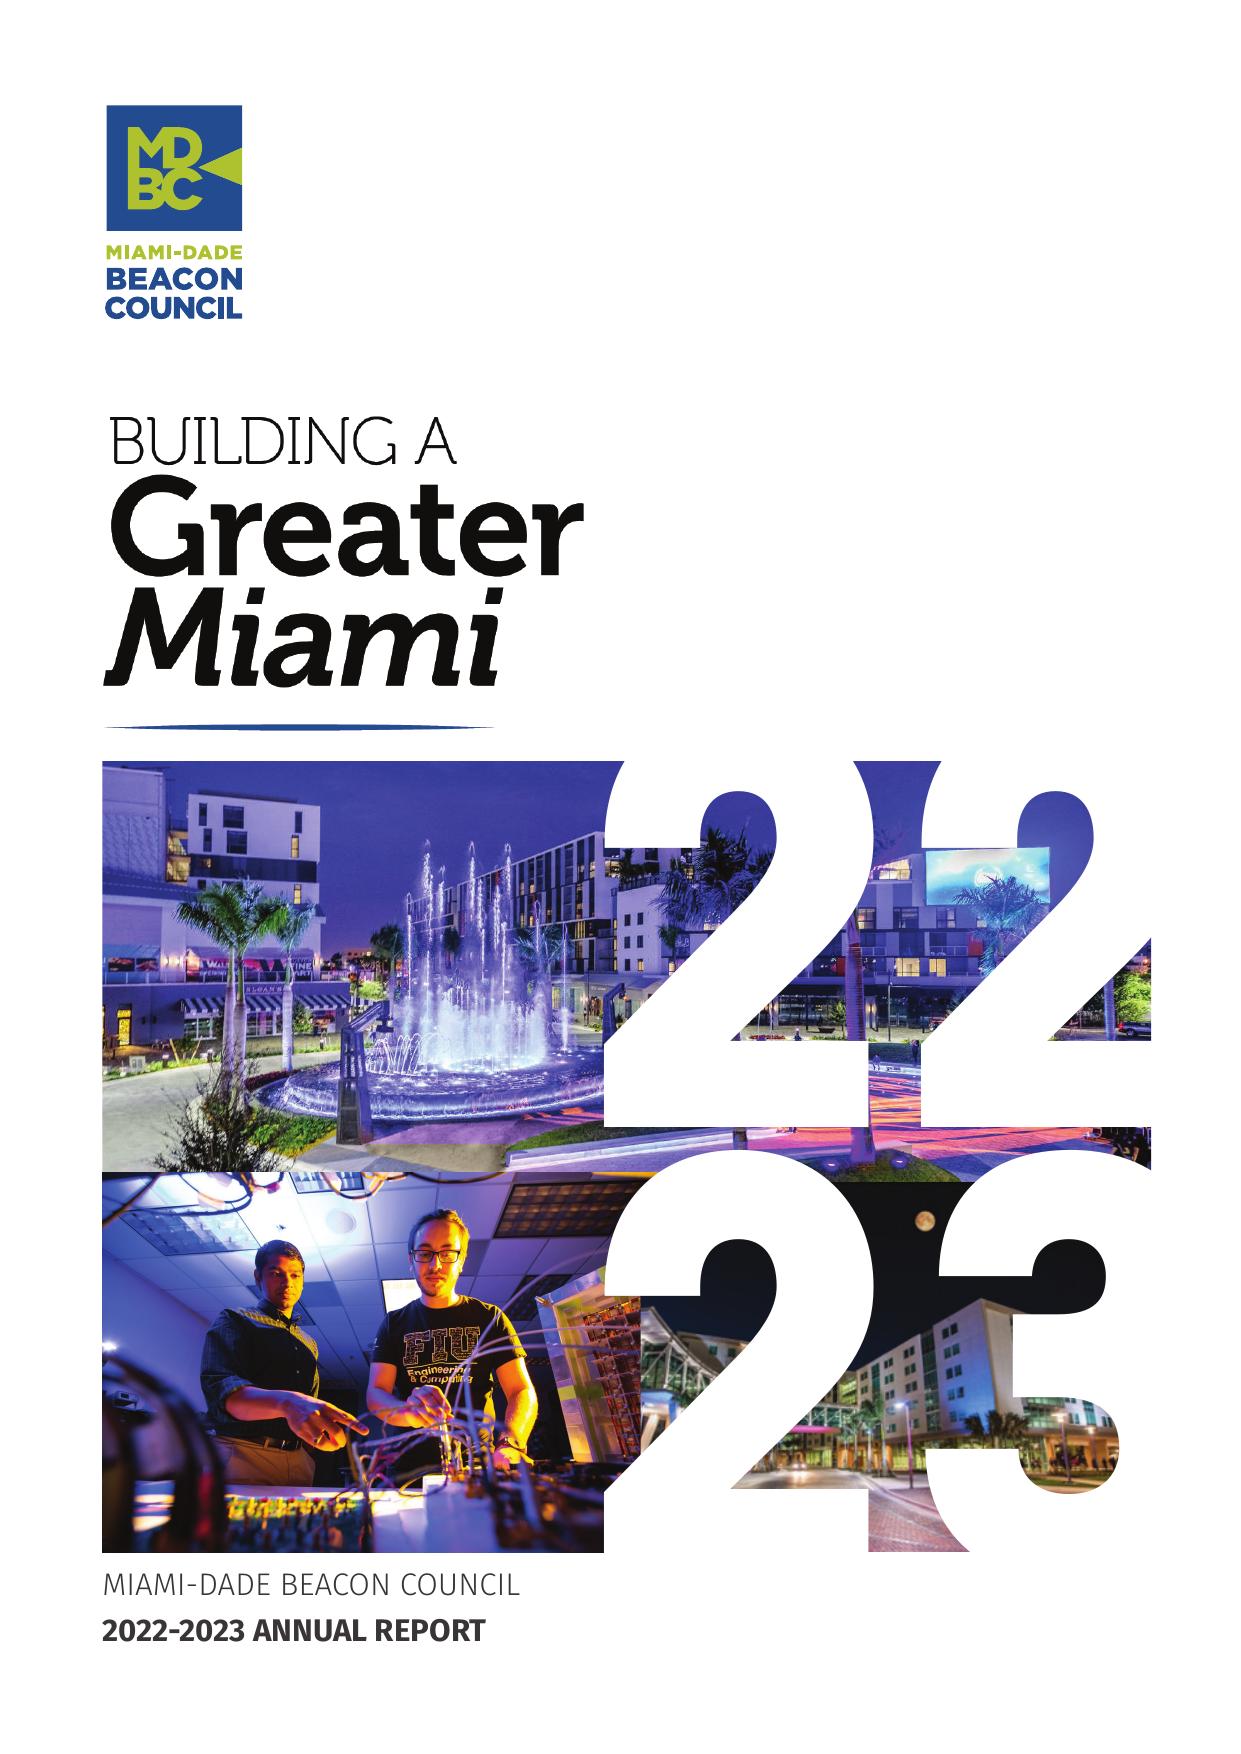 BEACONCOUNCIL 2023 Annual Report